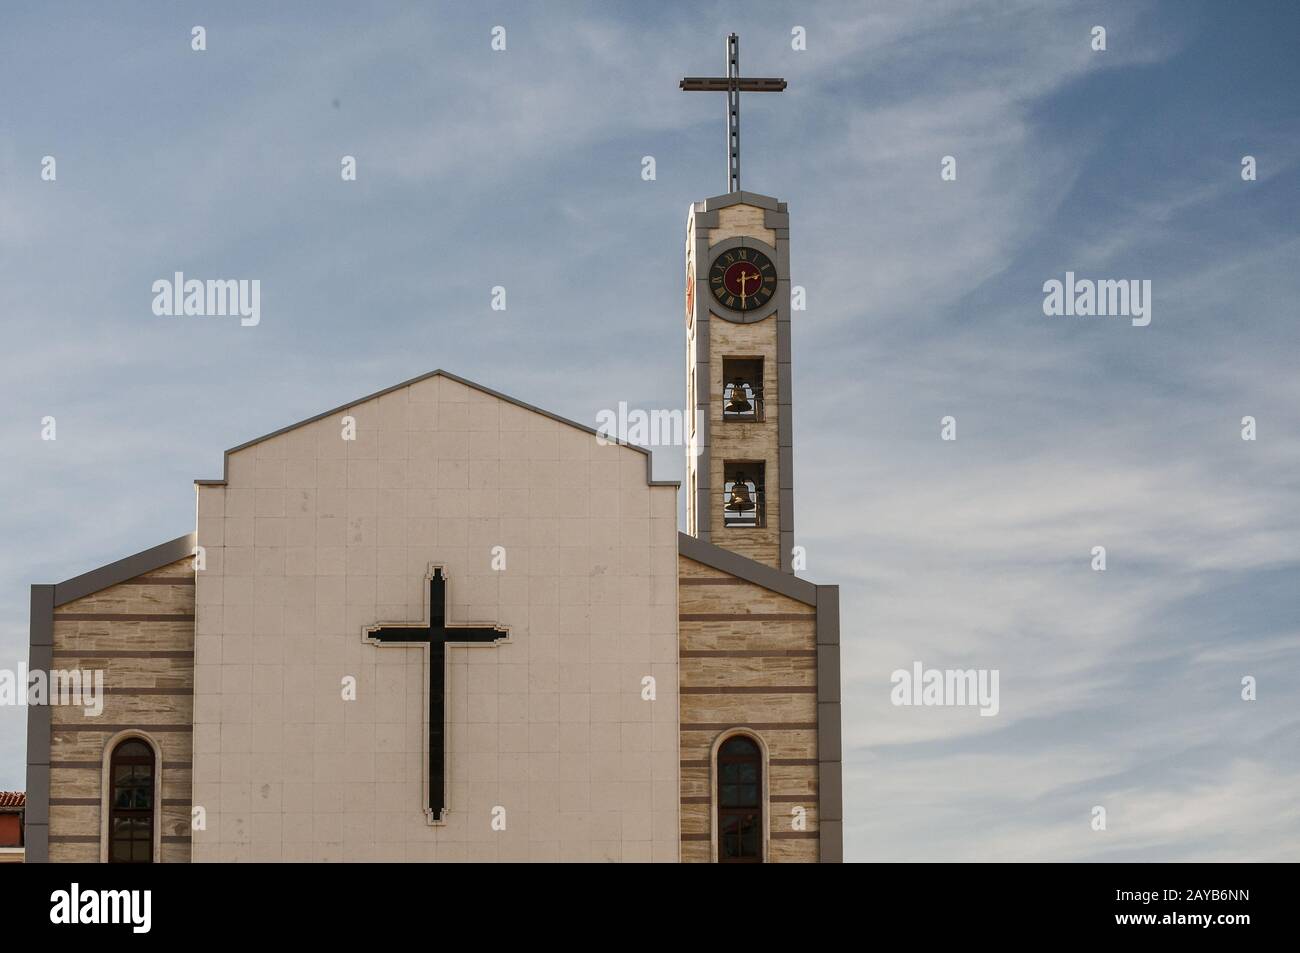 Contemporary catholic church building with bell tower and clock tower Stock Photo